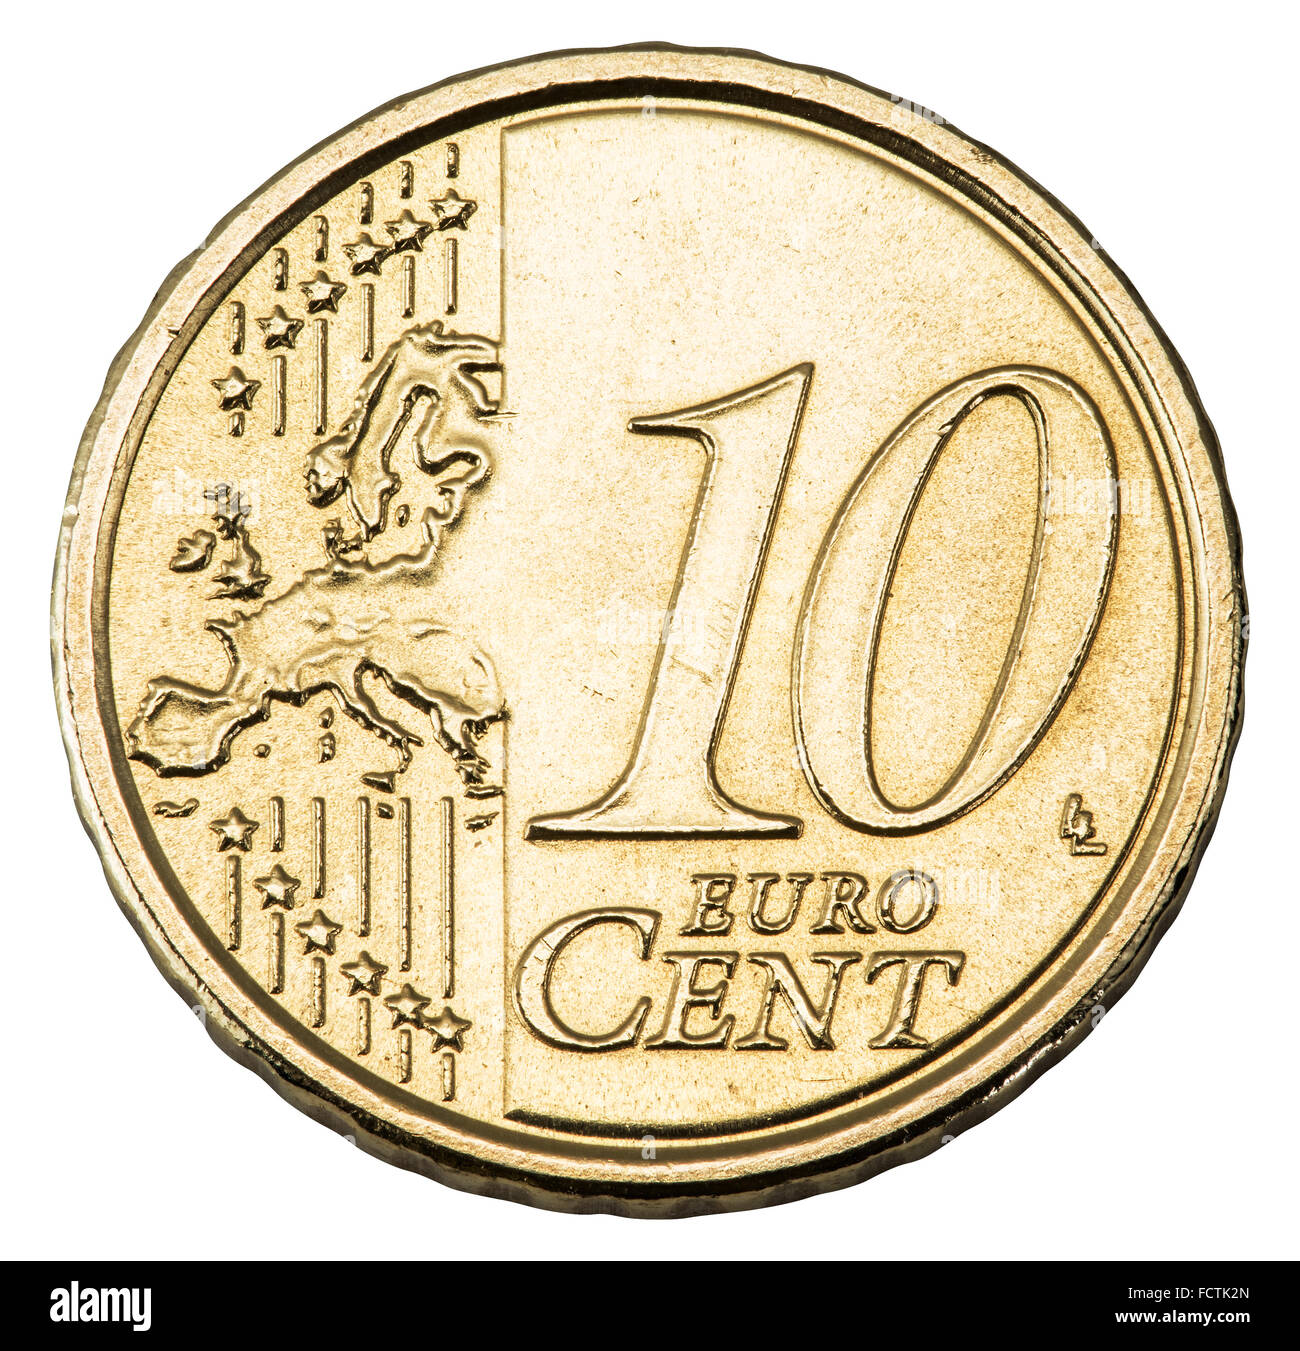 Old 10 cents euro coin isolated on a white background. File contains clipping paths. Stock Photo